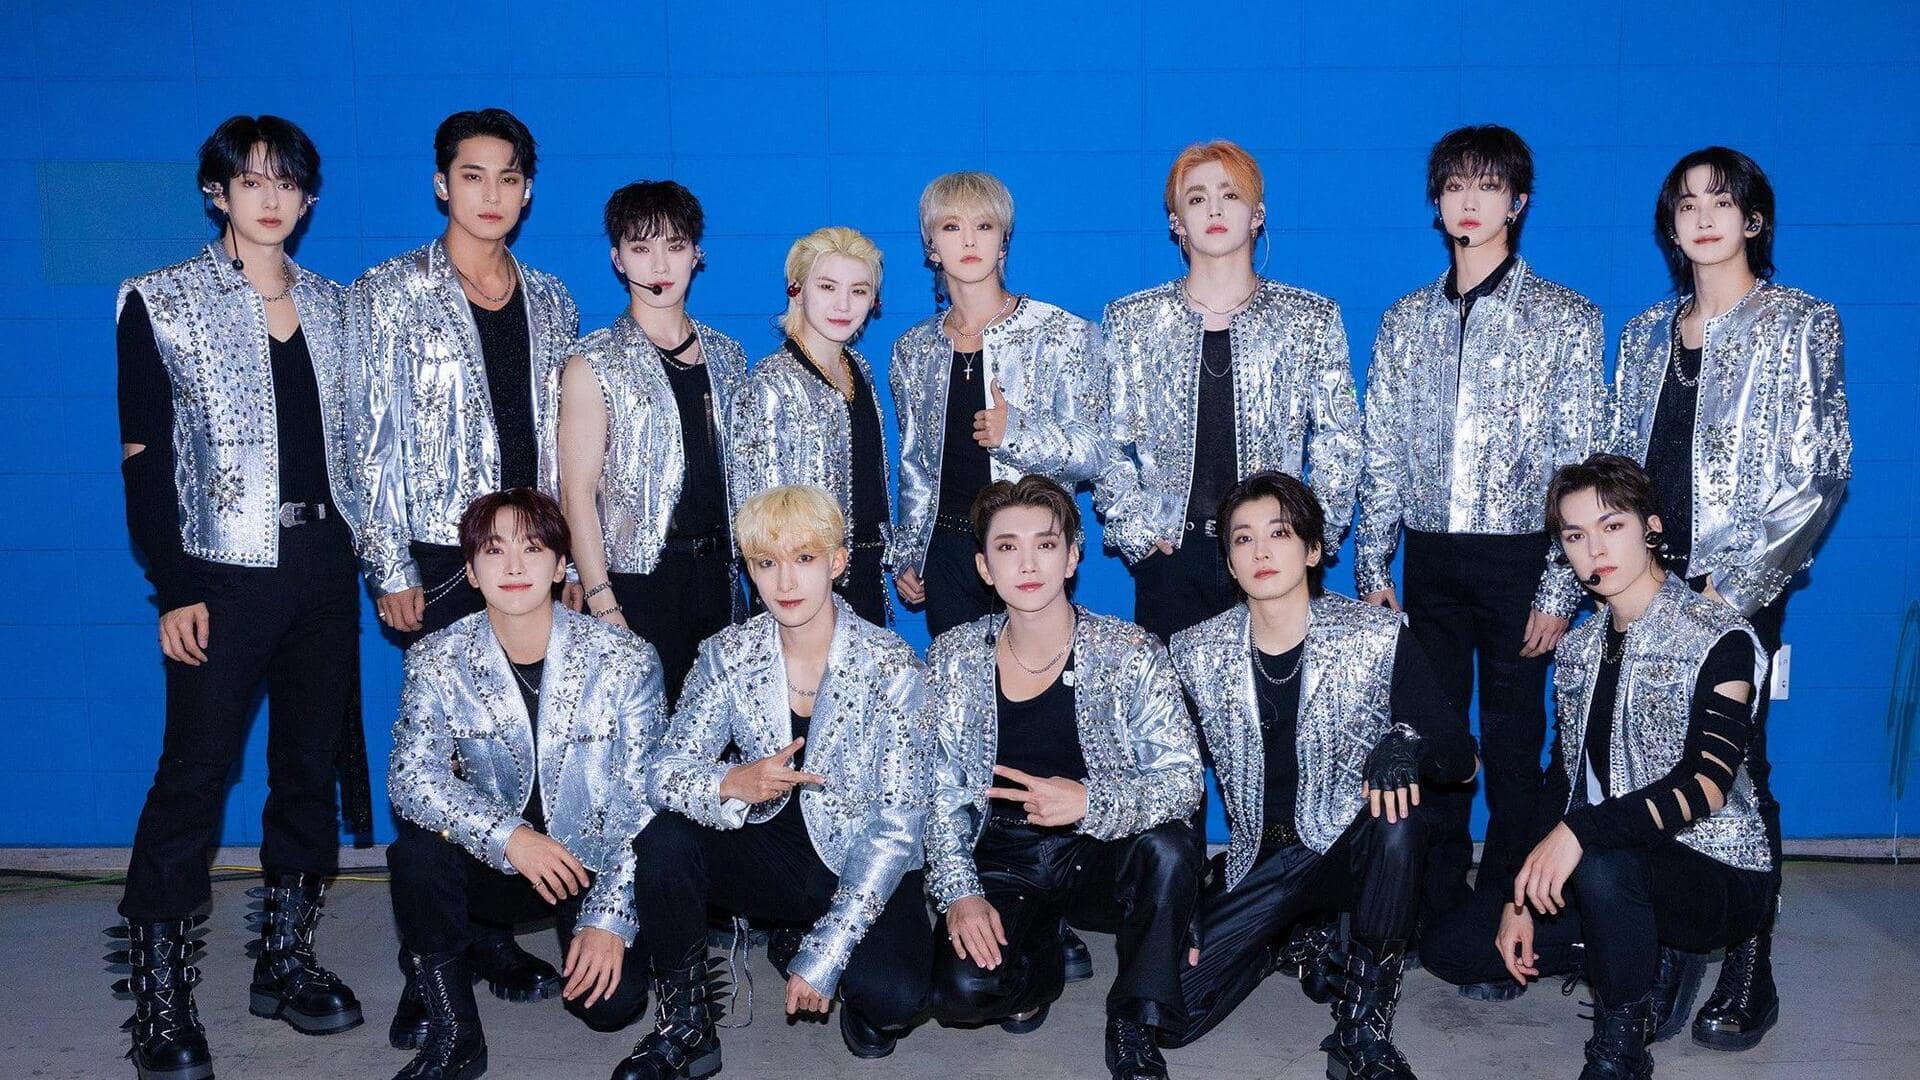 SEVENTEEN's latest album '17 Is Right Here' shatters records